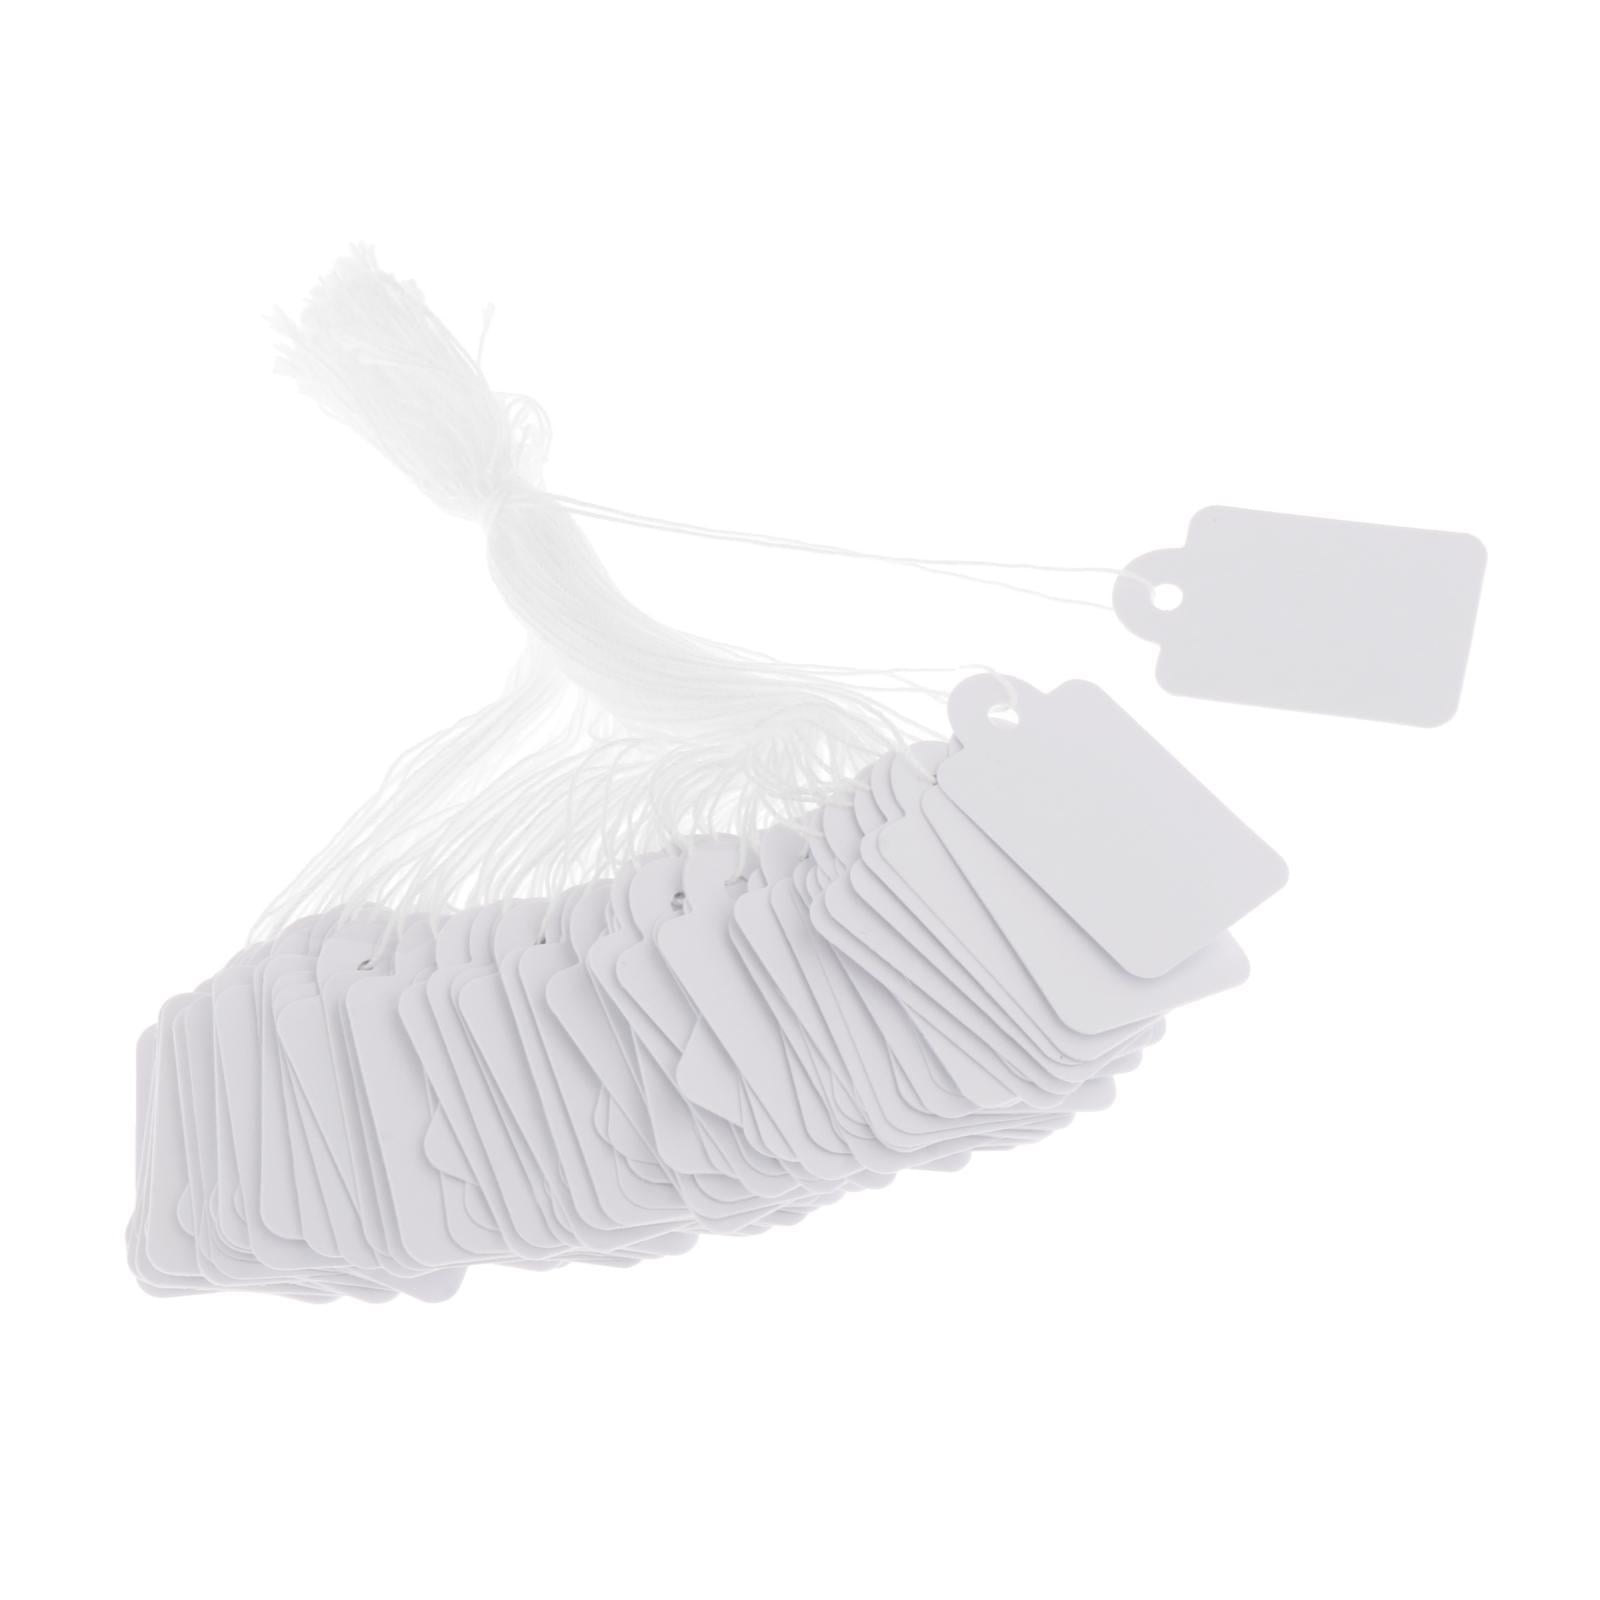  200 Pcs White Marking Tags Price Tags Paper Hanging Price Tags  with Strings Price Labeling Jewelry Clothing Tags for Retail, Store,  Display and More, 2.36 x 4.76 Inch : Office Products